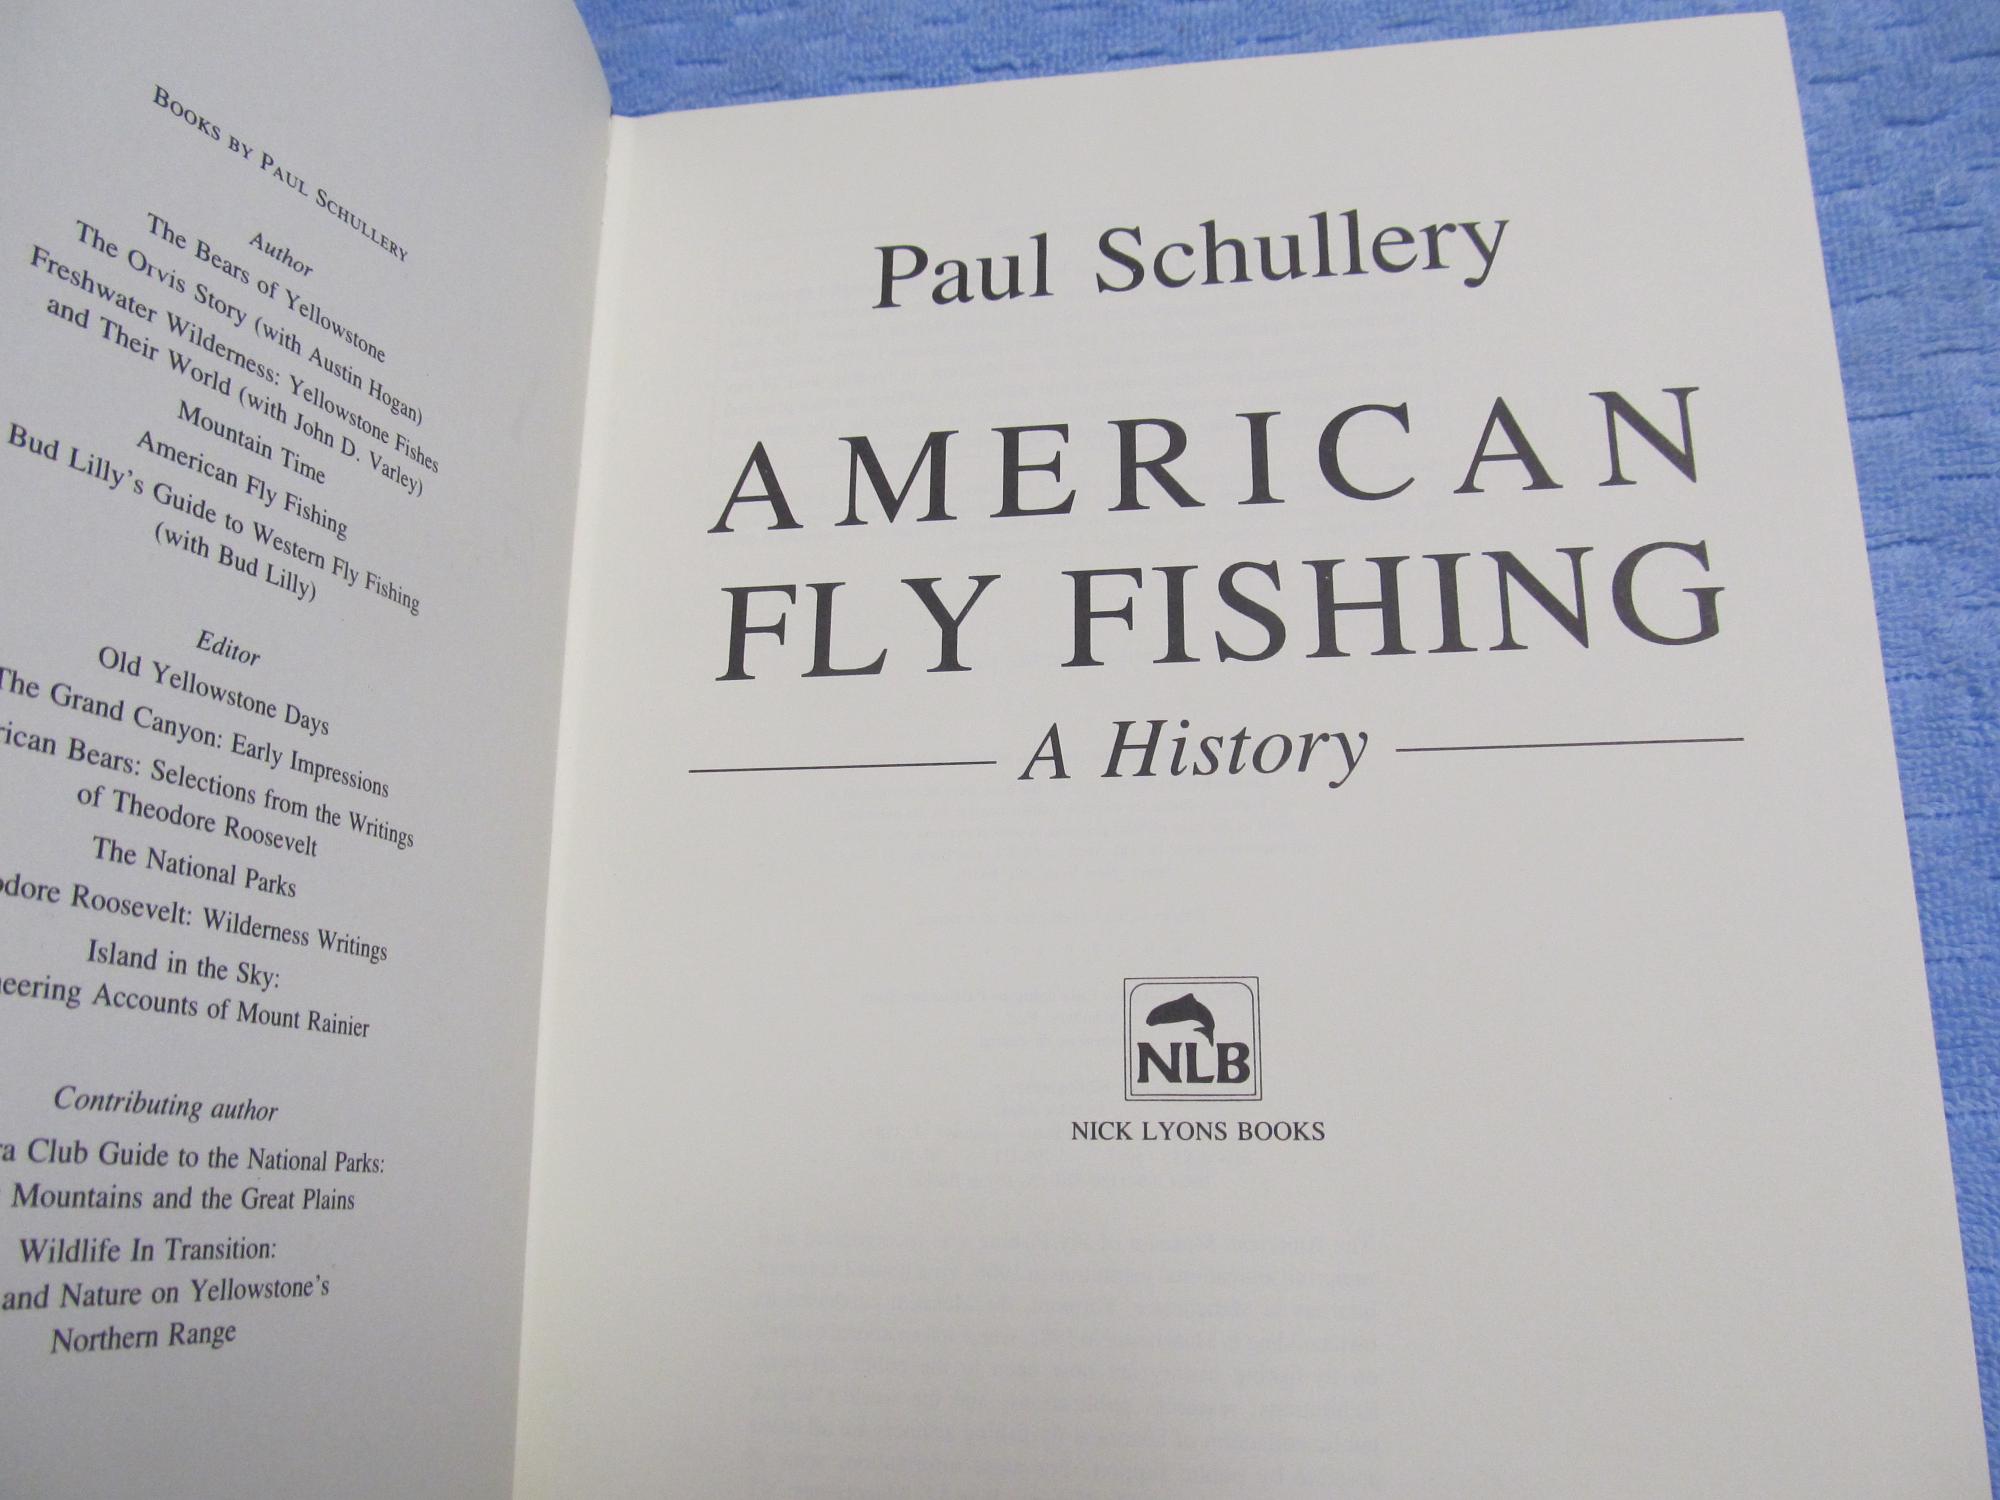 American Fly Fishing. A History. by Paul Schullery.